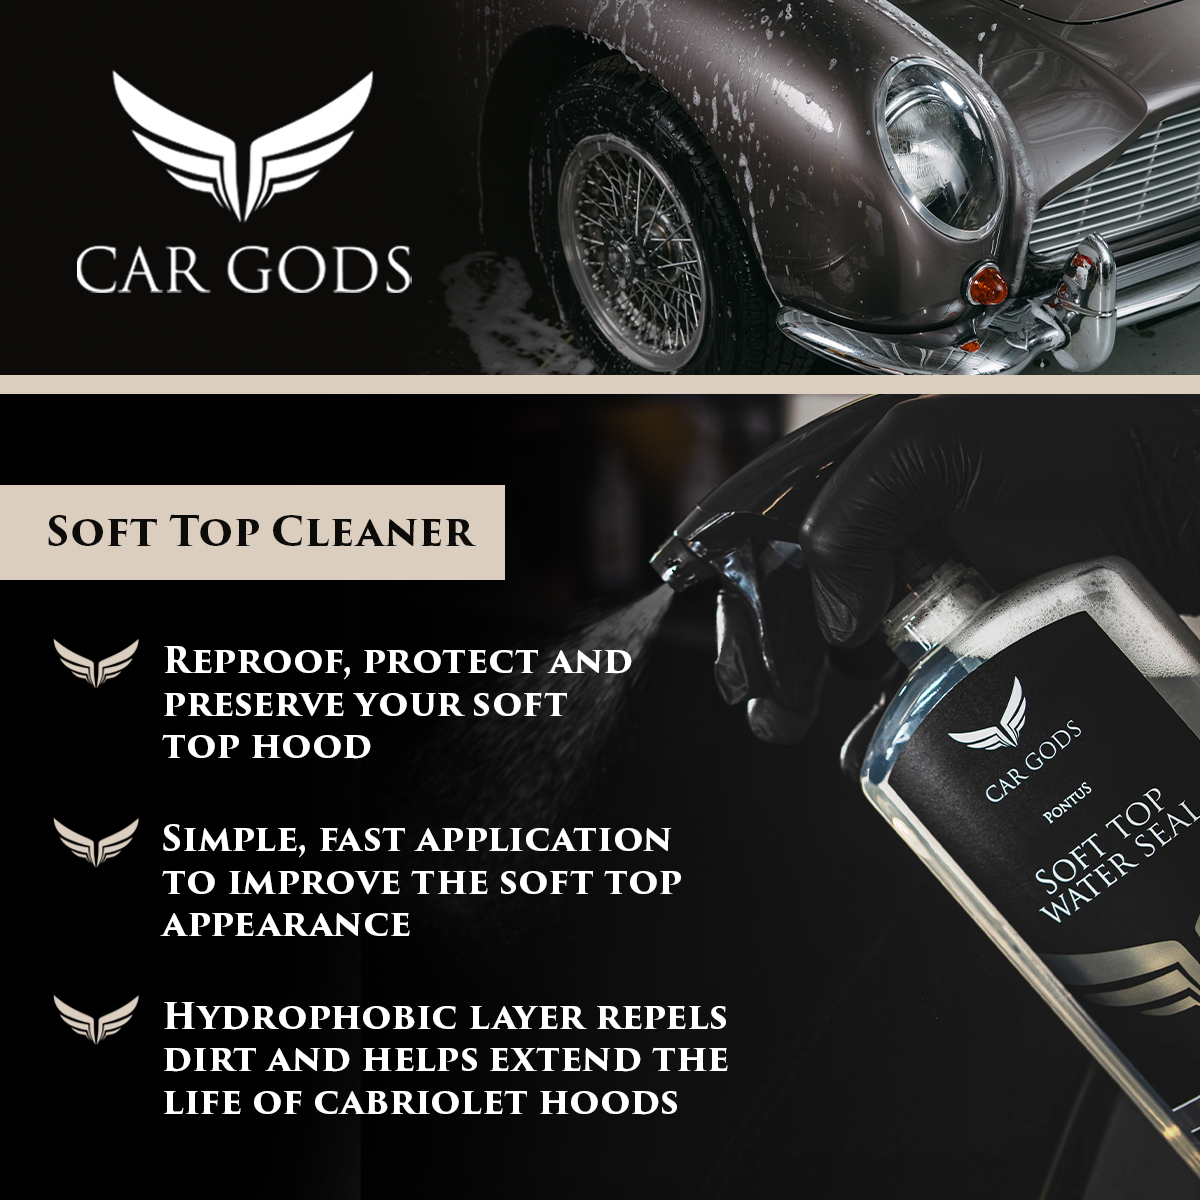 Car Gods Soft Top Water Seal. Reproof, protect and preserve your soft top hood with a simple, fast application of Soft Top Water Seal. The hydrophobic layer will repel dirt and help to extend the life of cabriolet hoods.